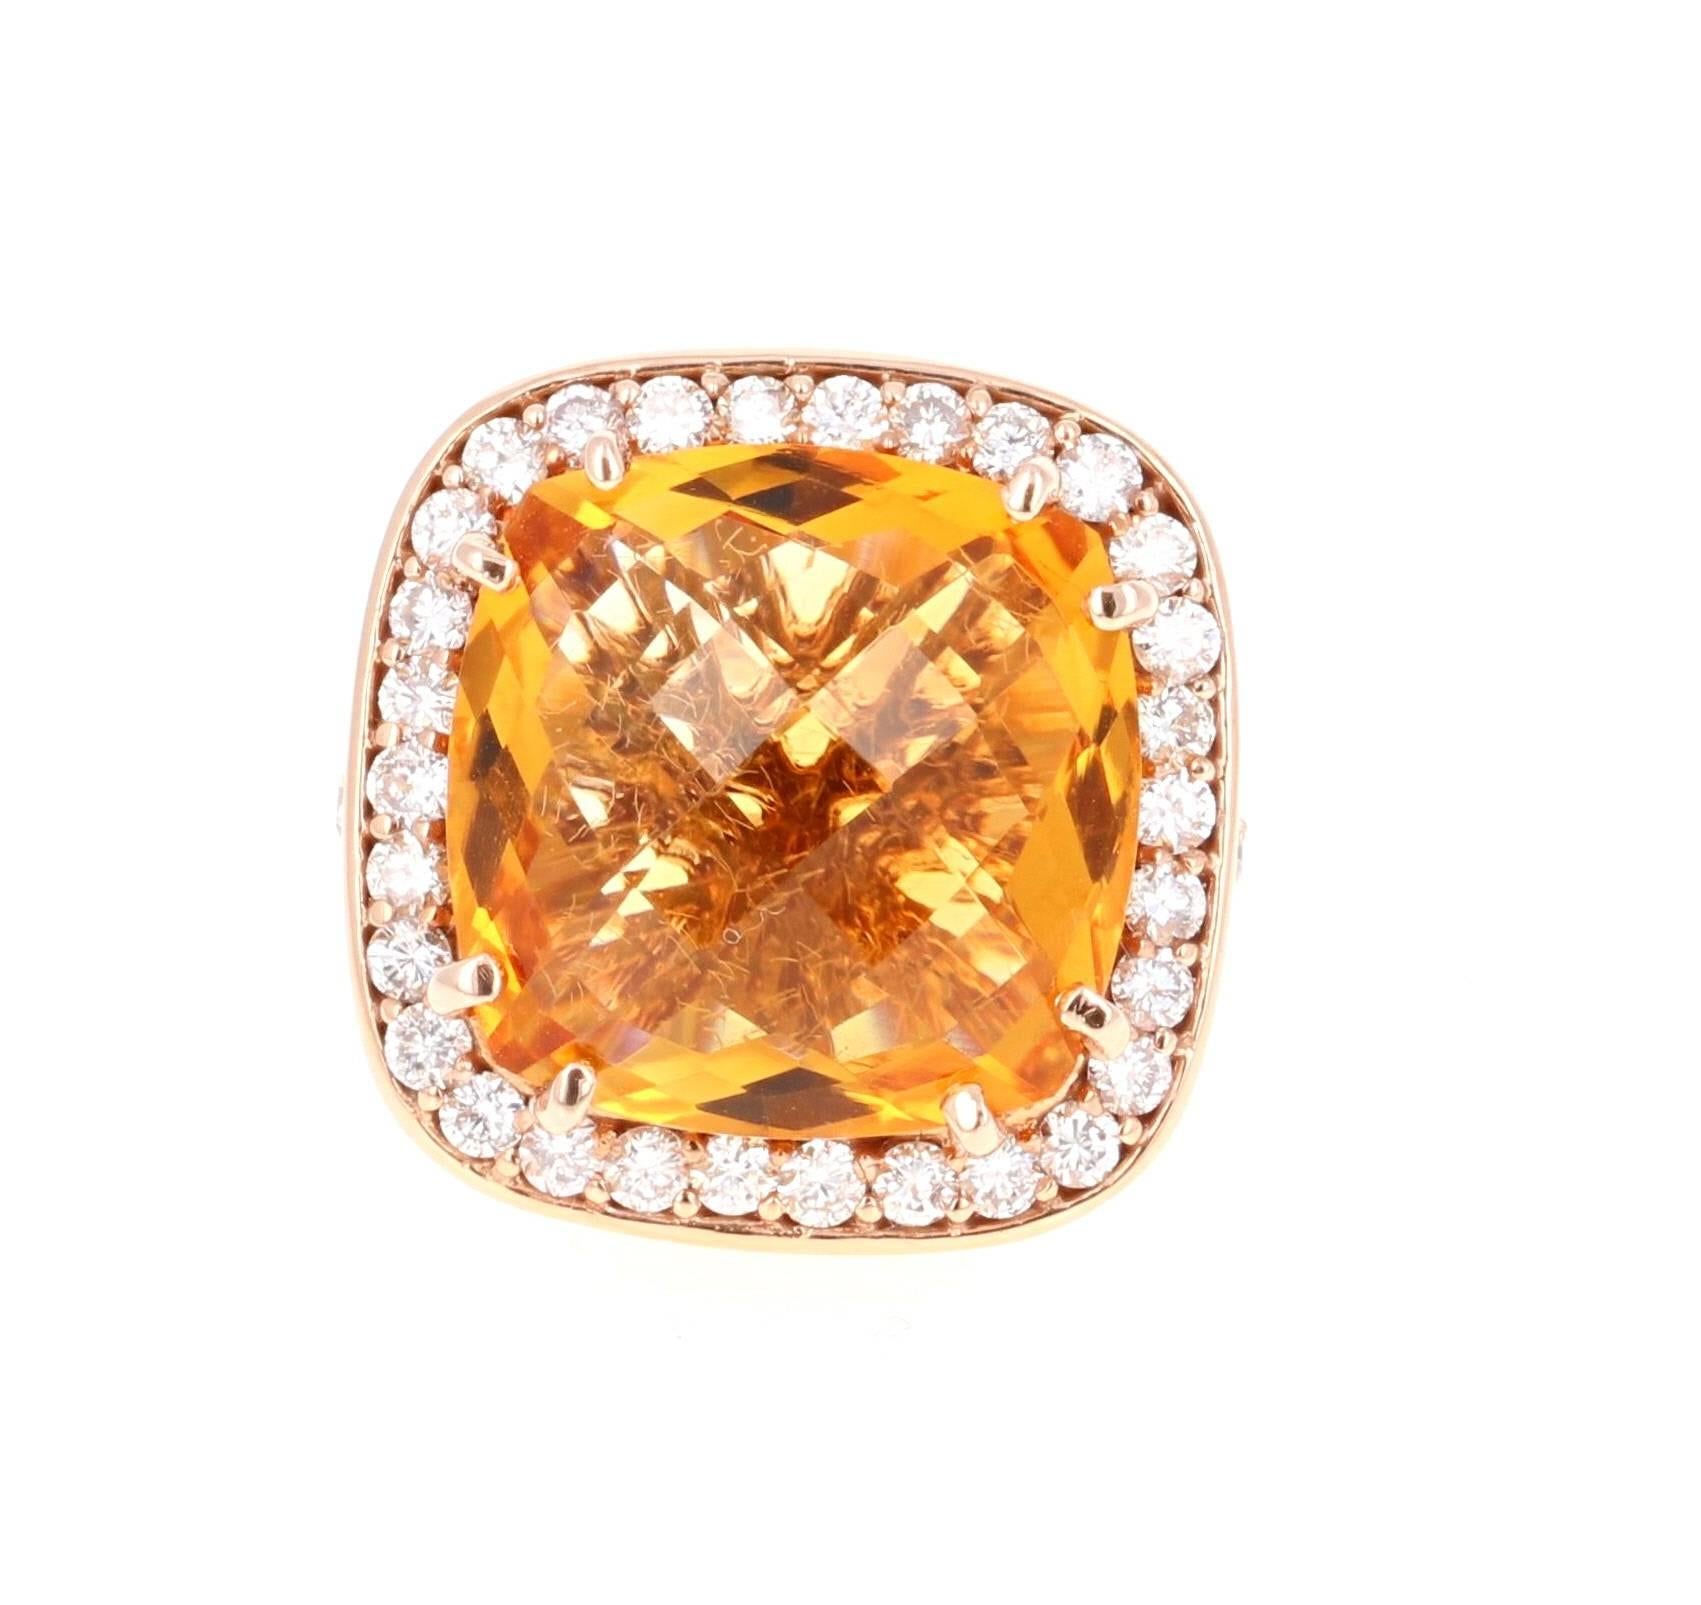 This beautiful ring has a bright orange Citrine Quartz in the center that weighs 12.81 carats. The ring is surrounded by a Halo of 42 Round Cut Diamonds that weigh 1.37 carats (Clarity: SI2, Color: F). The total carat weight of the ring is 14.81